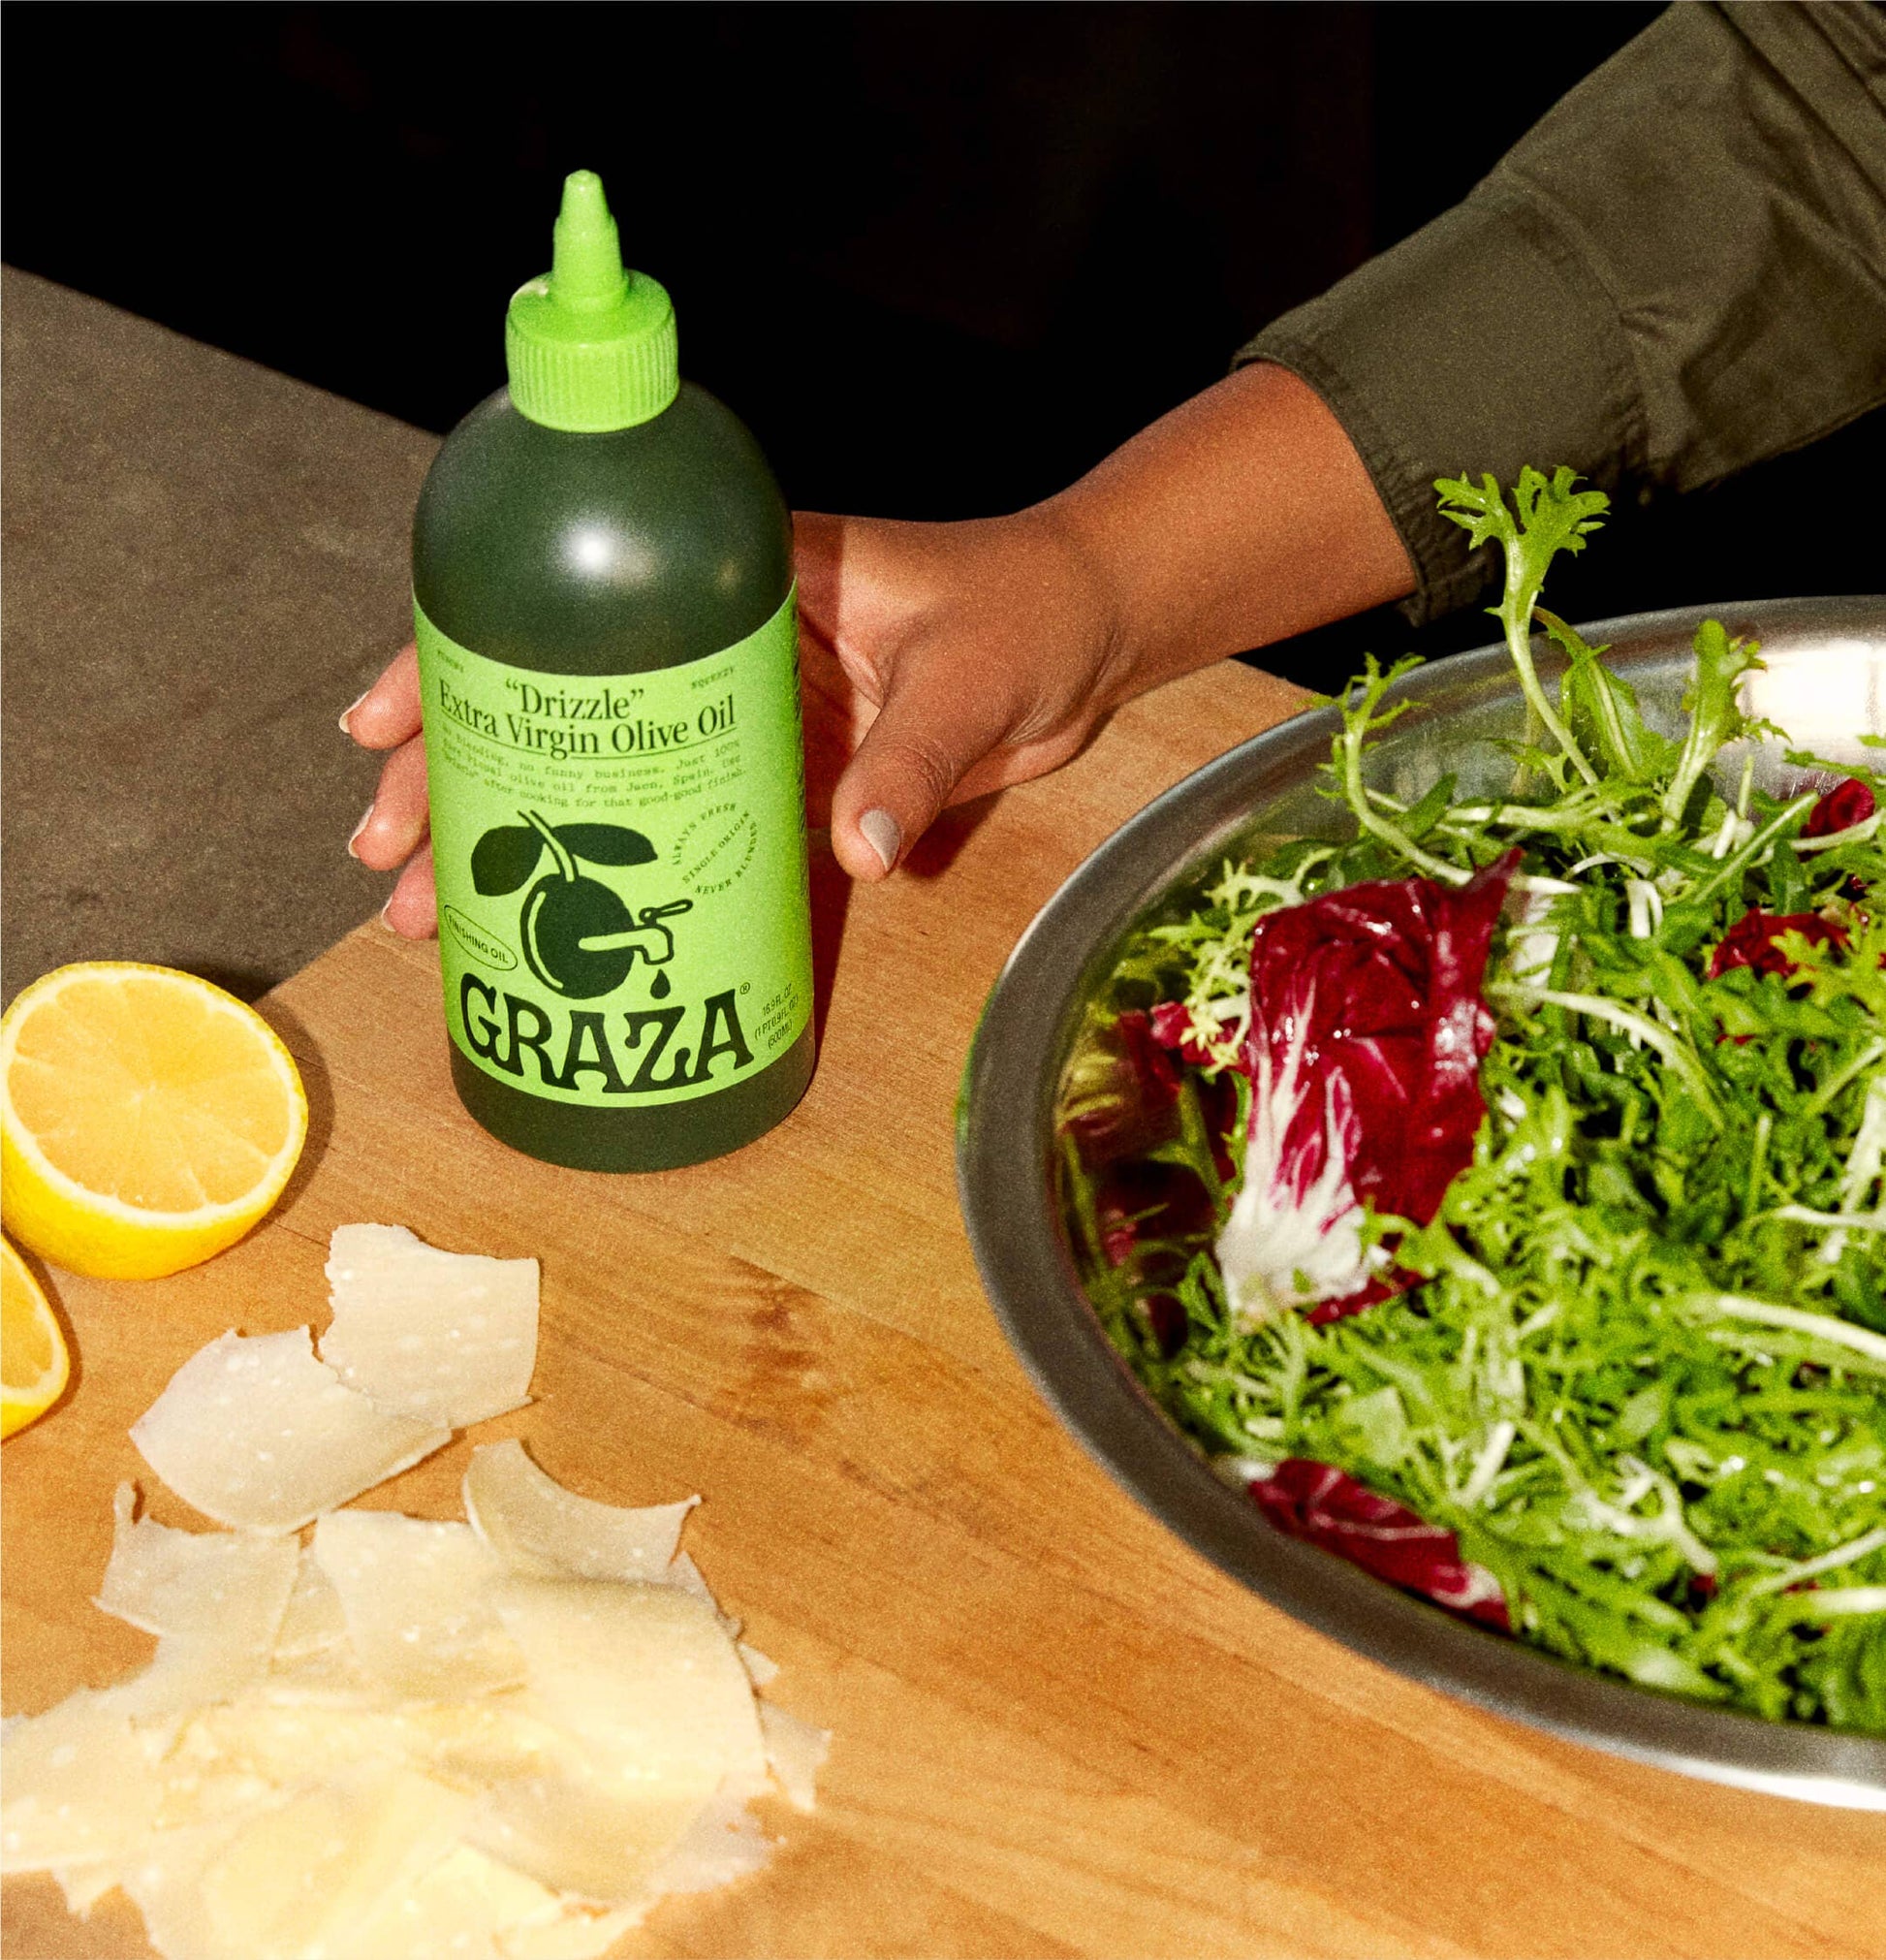 With Drizzle, you can make flavorful vinaigrettes at home and stop wasting money on salad dressings loaded with preservatives. 